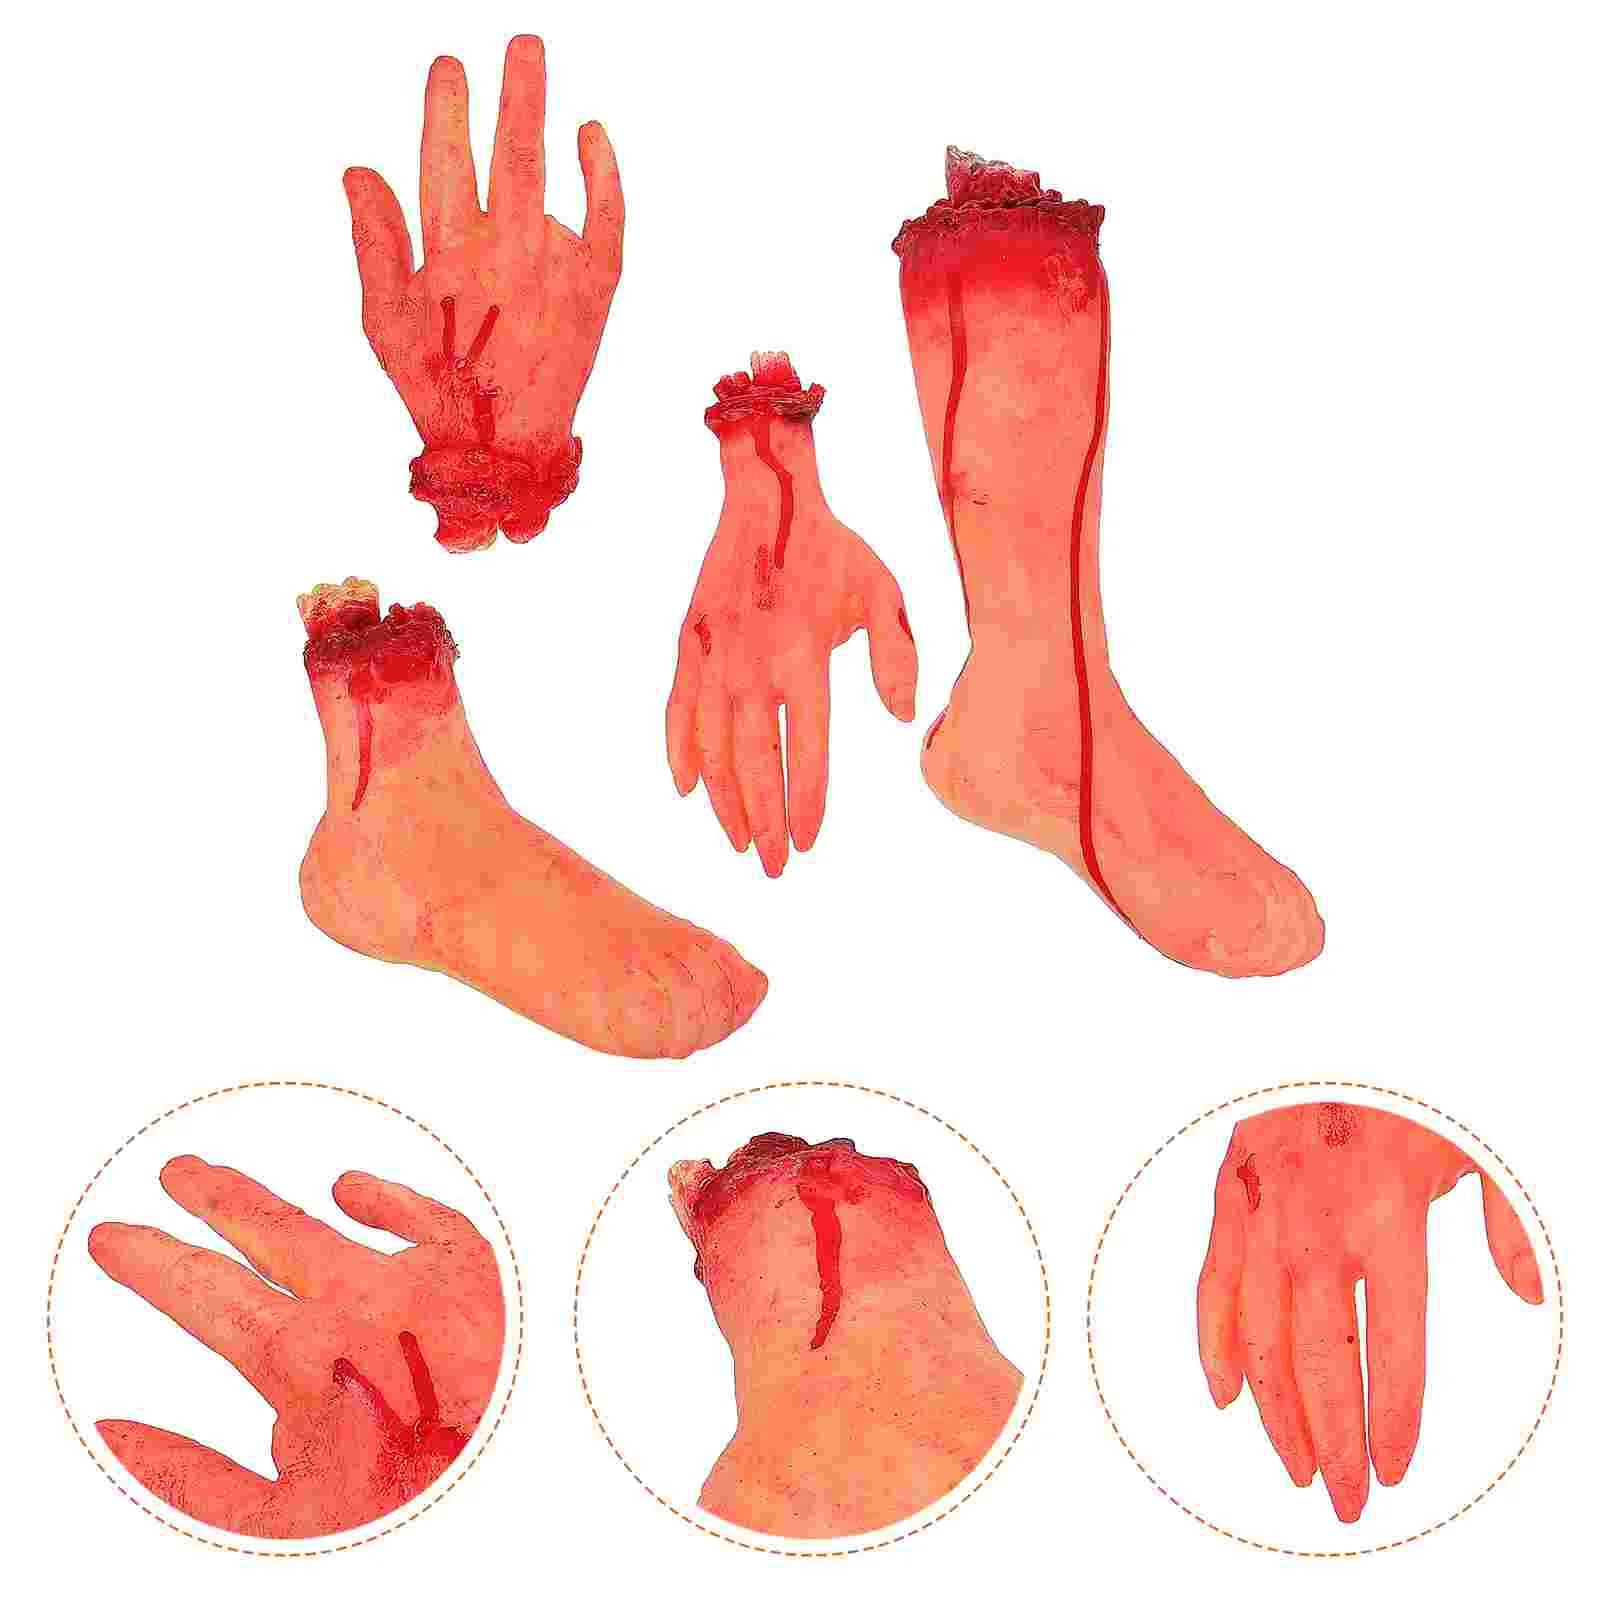 

4 Pcs Simulation Severed Limbs Festival Scary Prop Tricky Props Prank Decoration Halloween Vinyl Haunted House